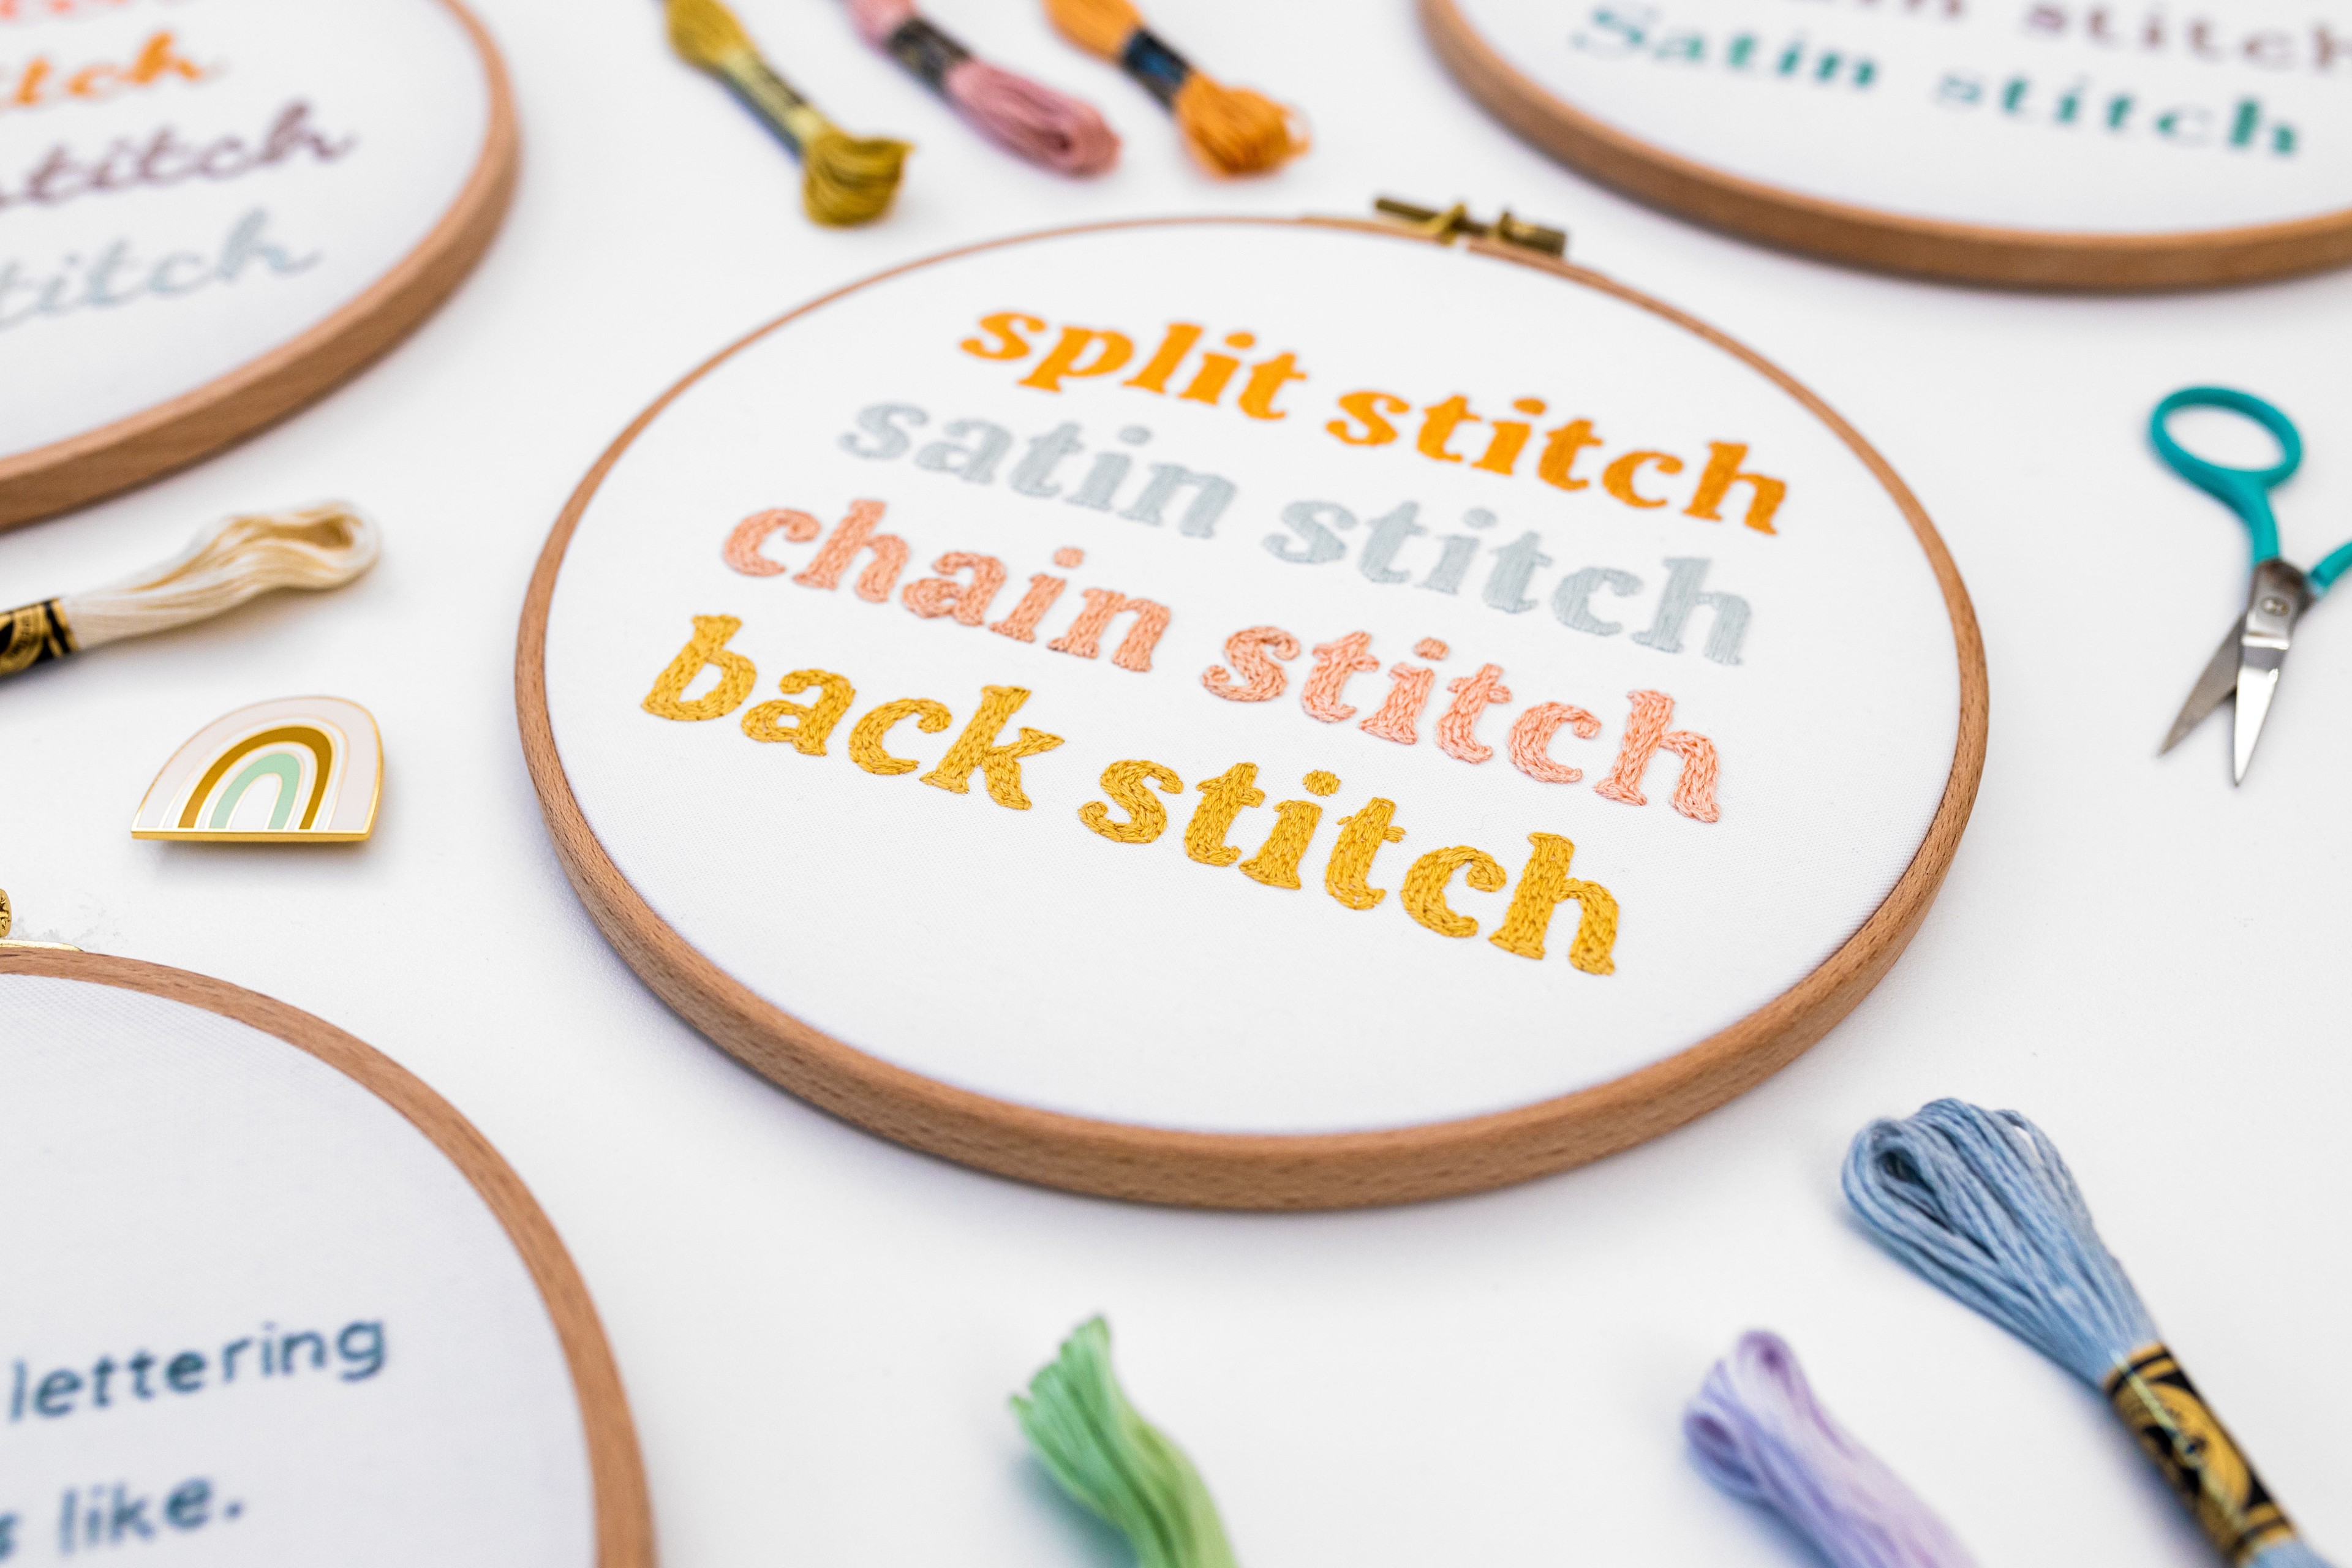 This is an image of different stitches and writing on modern embroidery hoops.